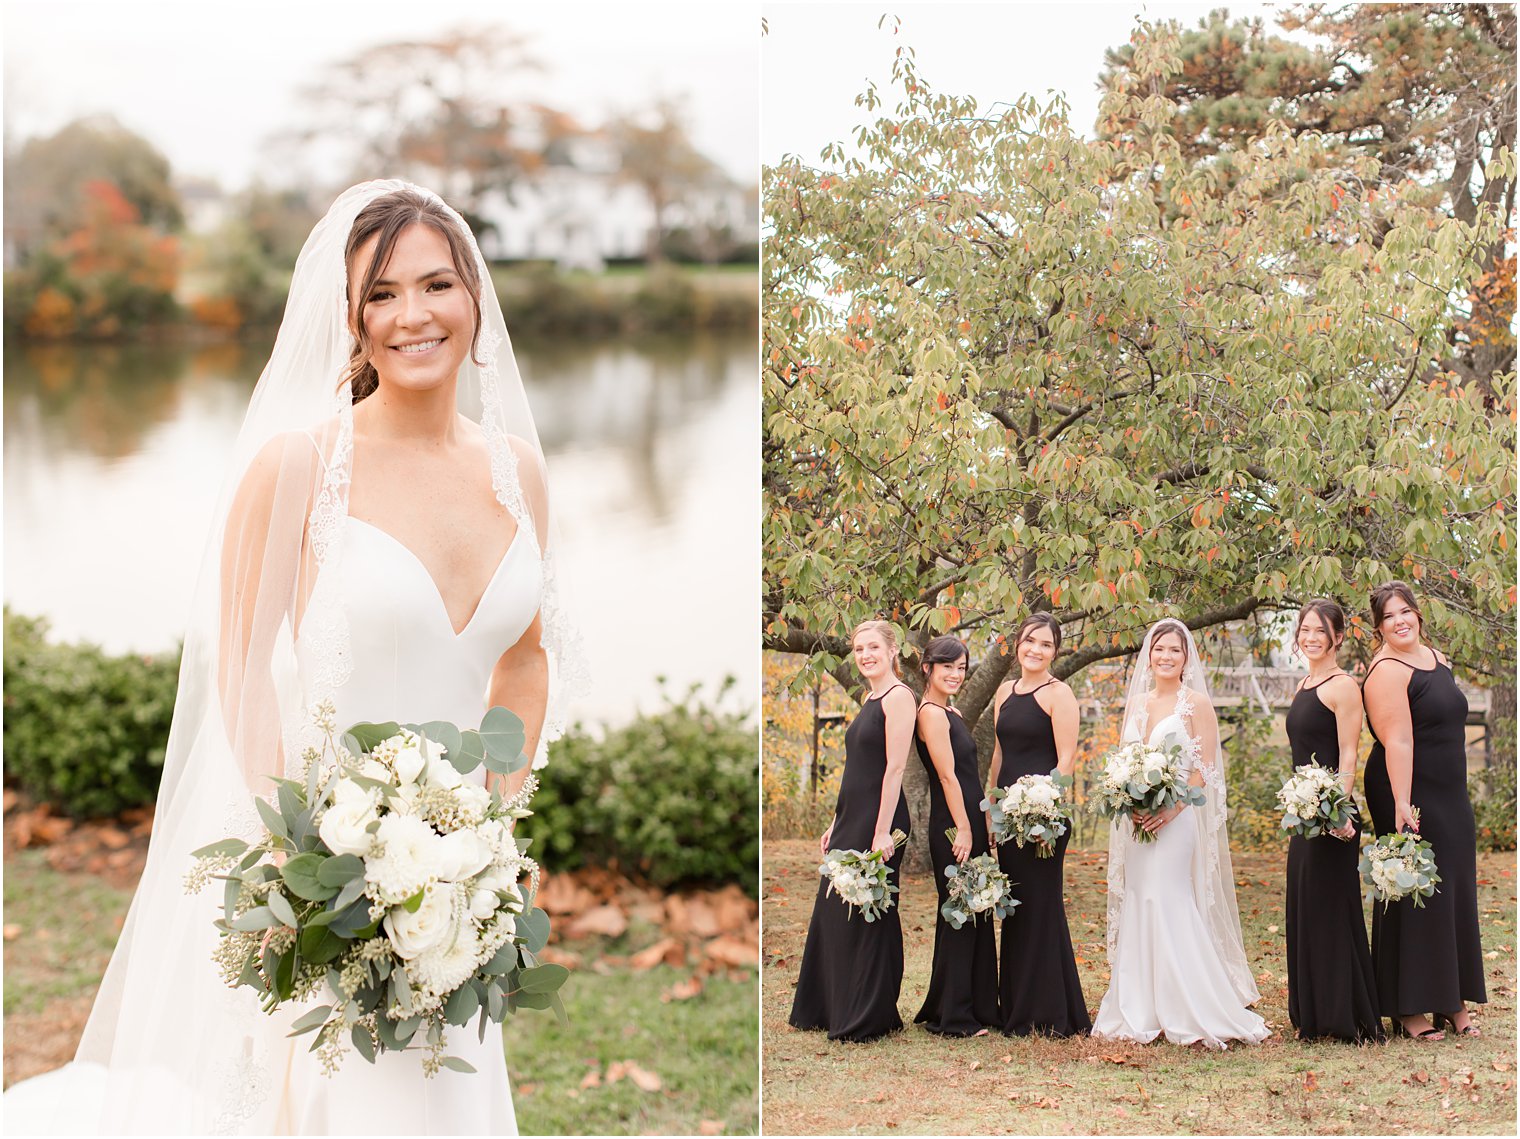 bride in modern wedding dress with veil poses with bridesmaids in chic black bridesmaid gowns